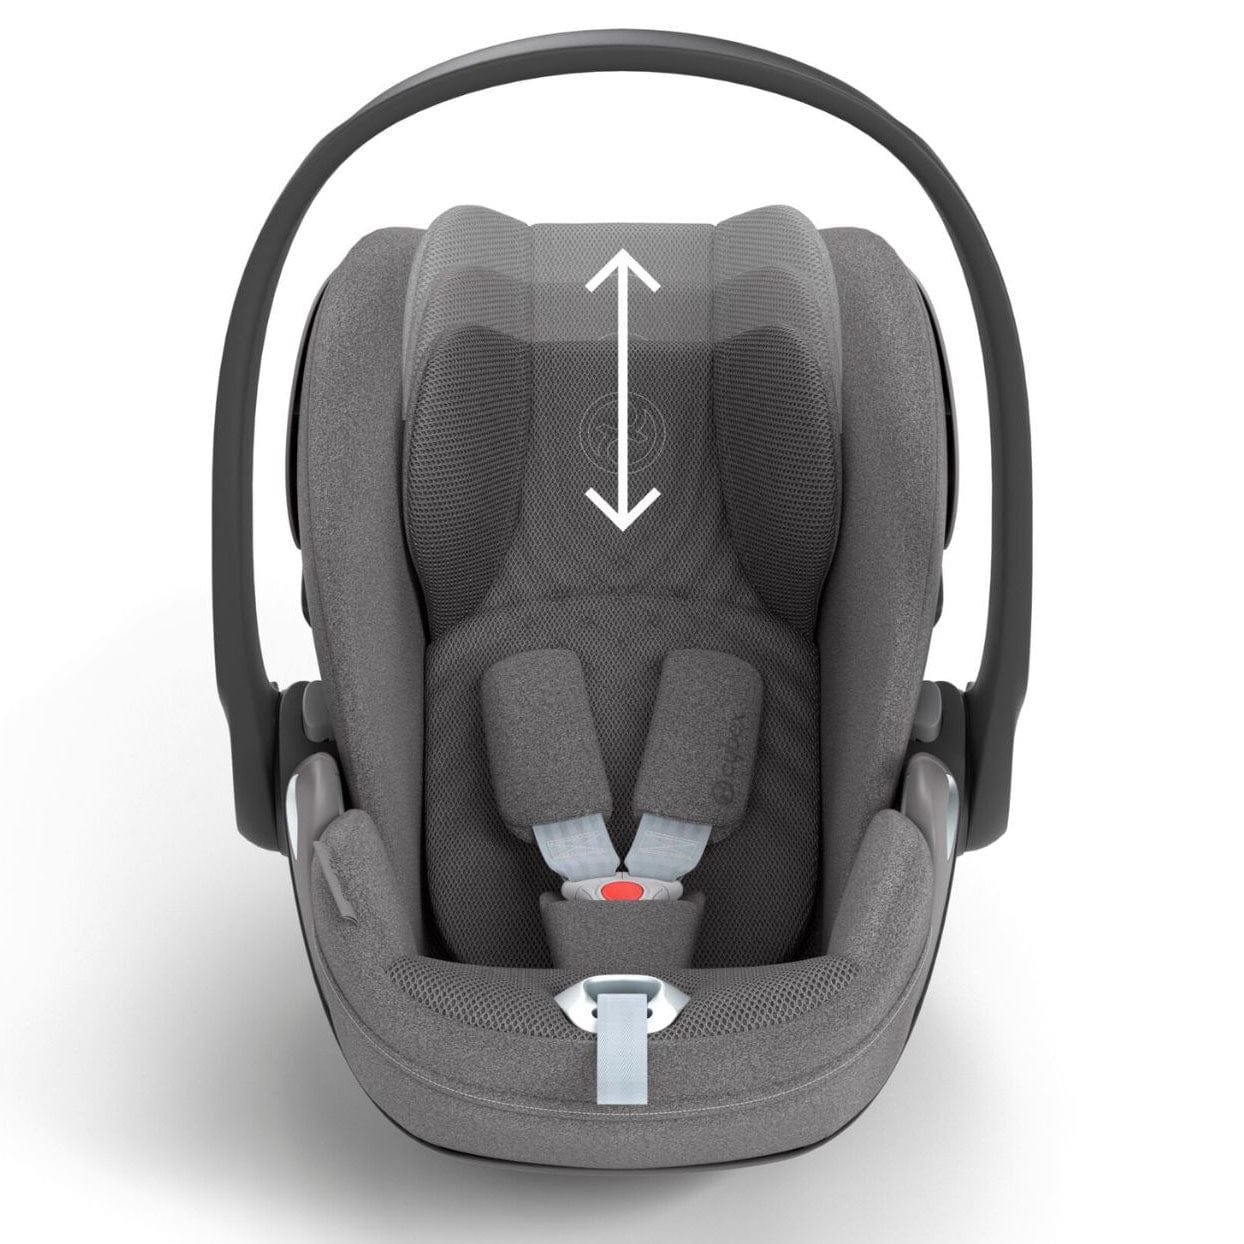 Cybex Cloud T PLUS i-Size Car Seat in Mirage Grey Baby Car Seats 523000239 4063846402793